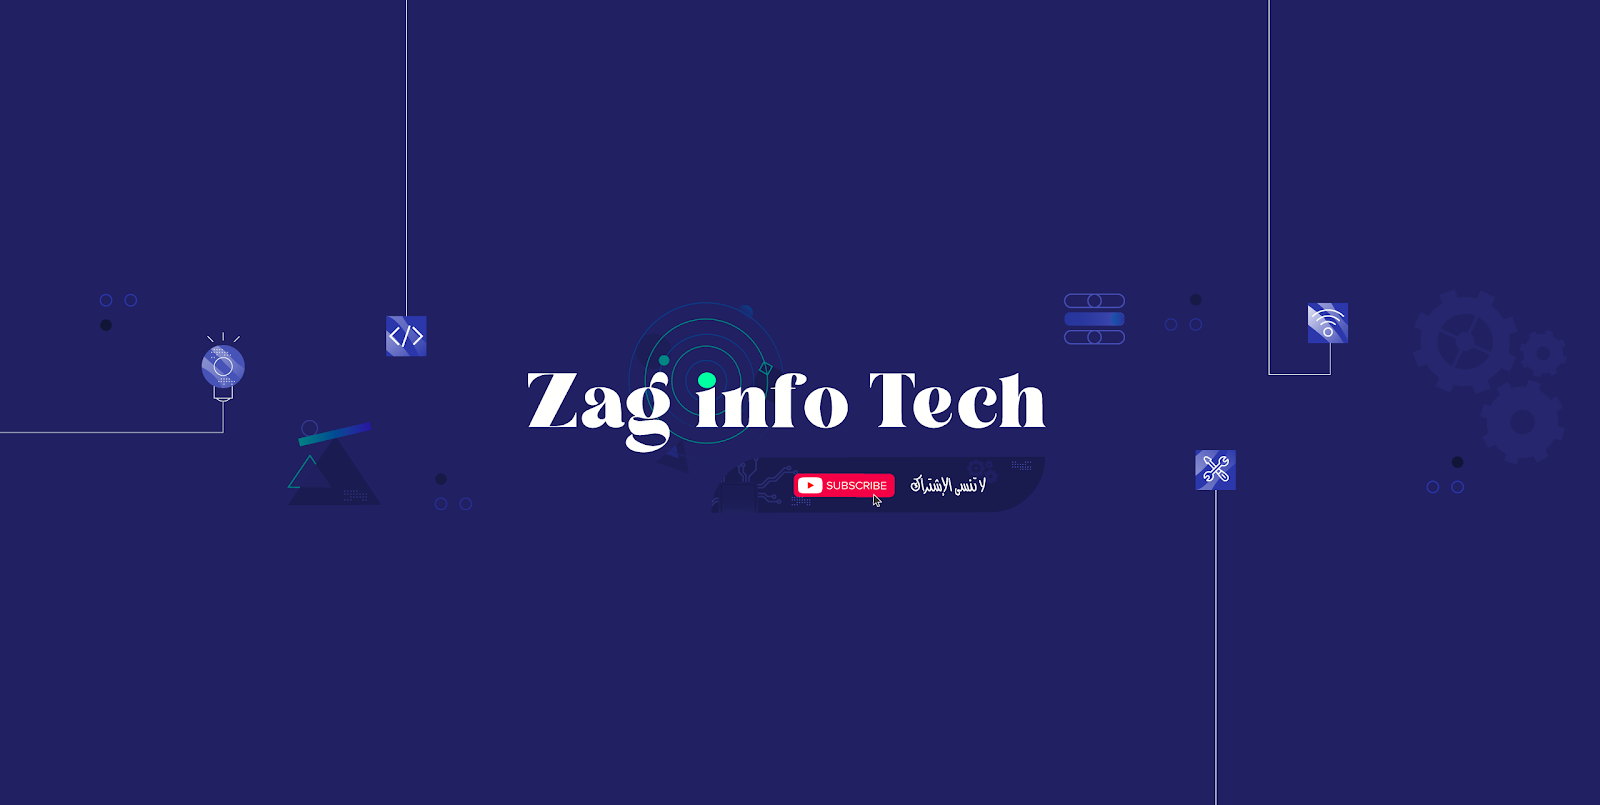 zag info tech : Your comprehensive guide